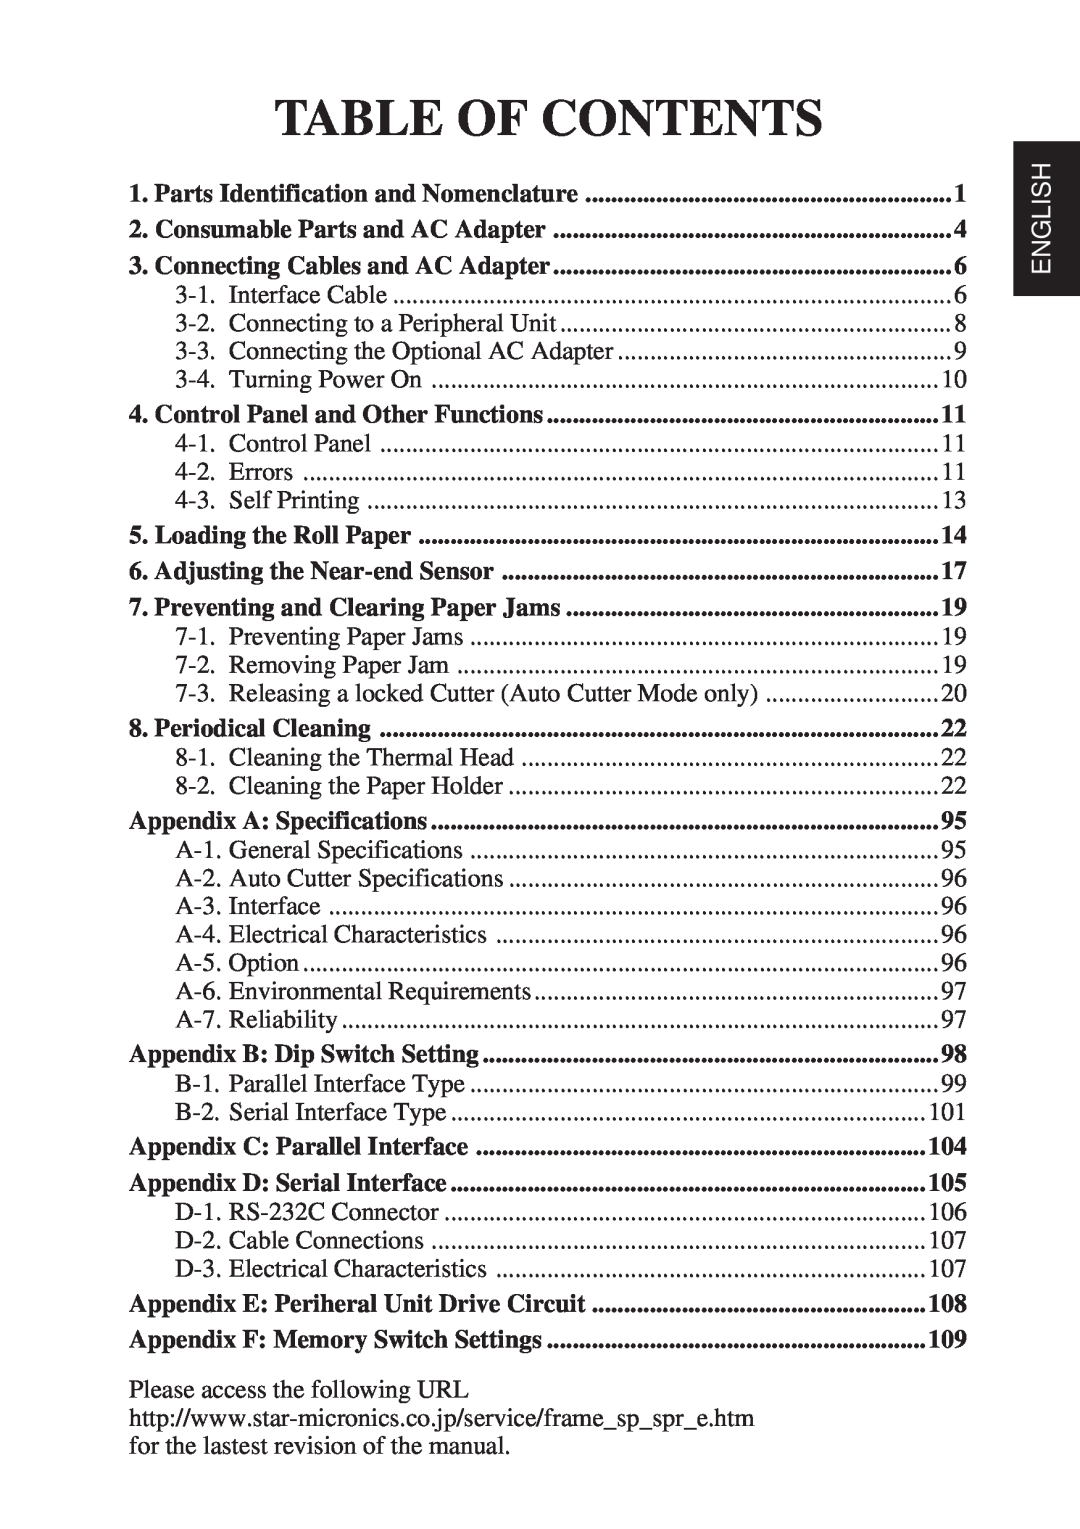 Star Micronics TSP600 user manual Table Of Contents, English 